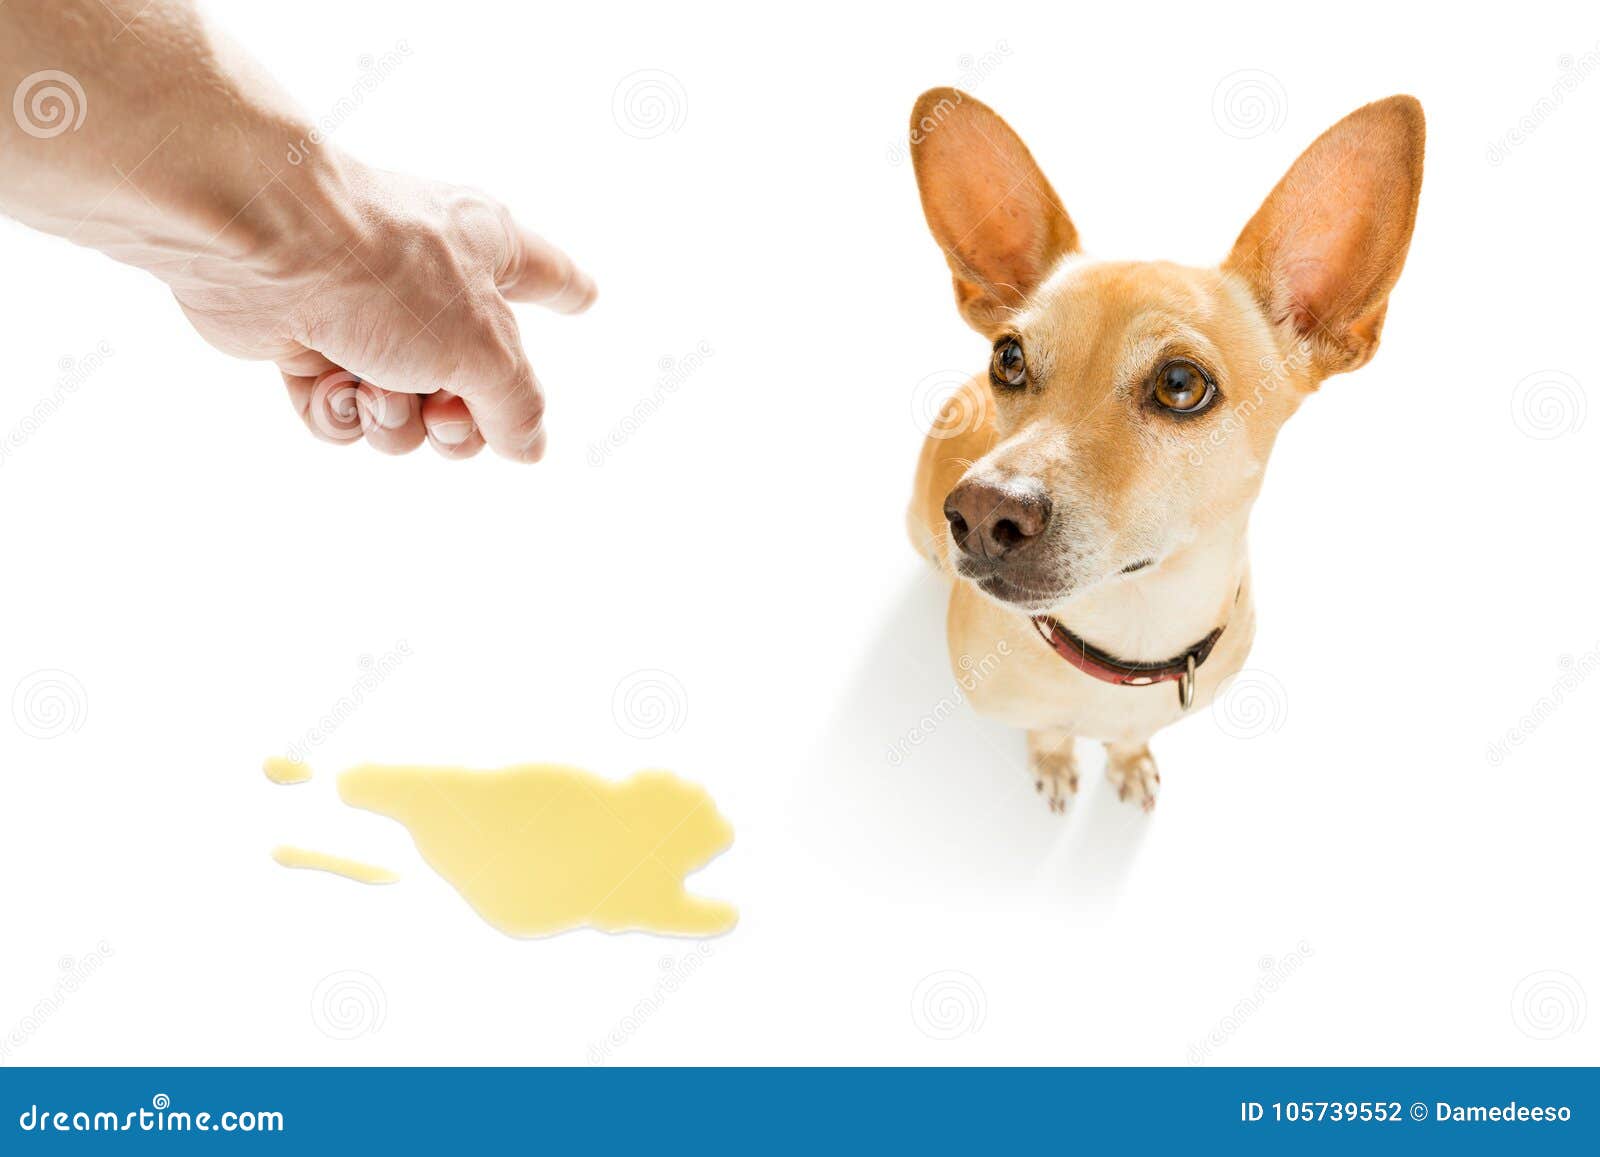 Dog Pee Urine On The Floor Stock Photo Image Of Obedience 105739552